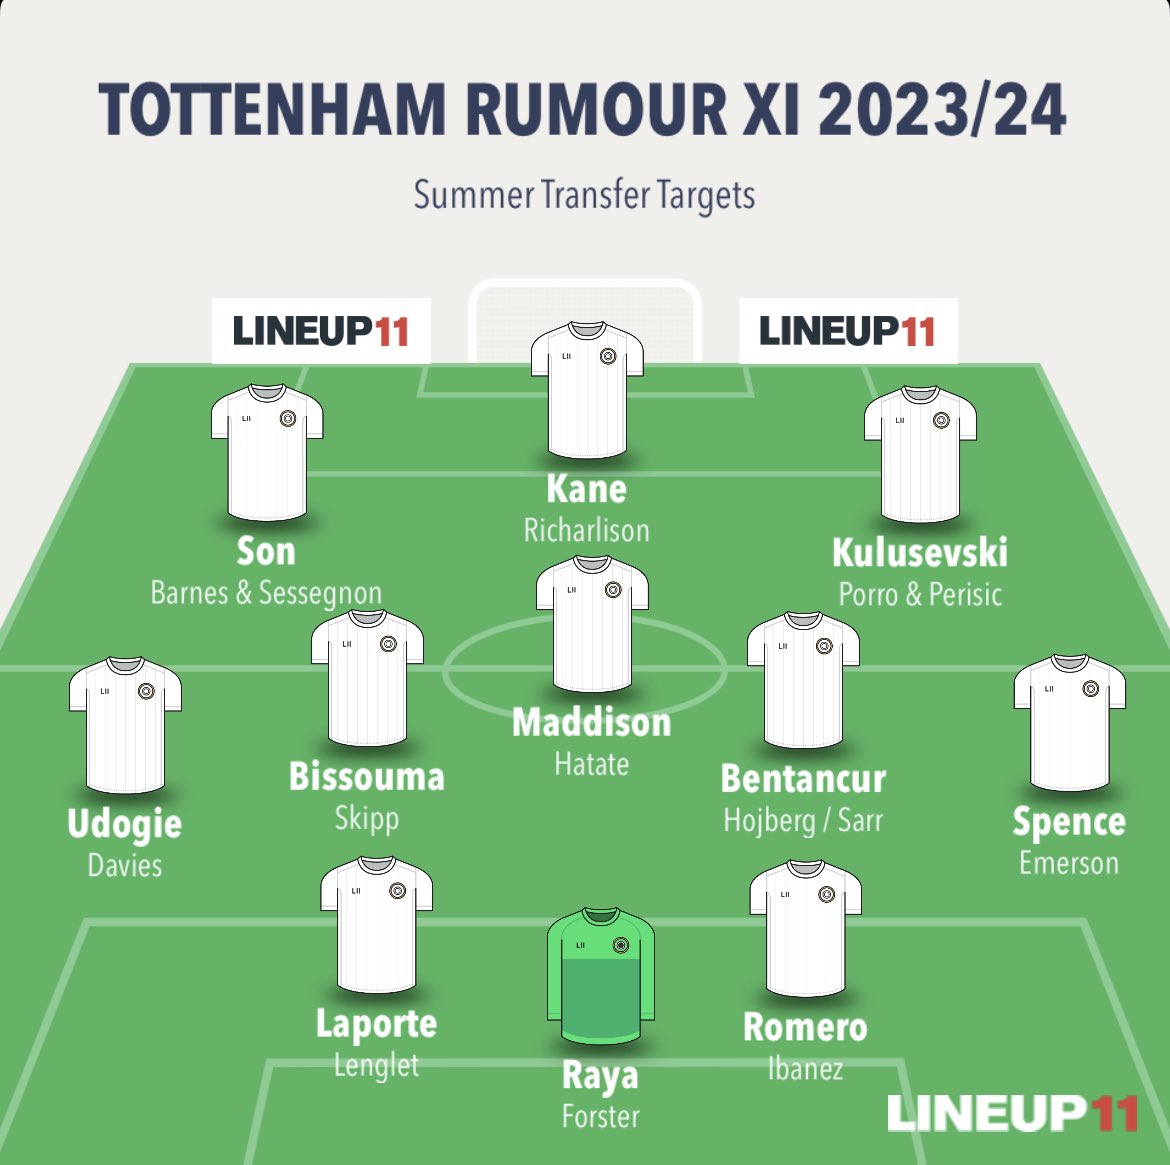 This would appear to be the Tottenham squad for next season, if the prevailing rumours prove to be true.

Not included the kids nor most of the surplus out on loan. They may obviously come into the picture during preseason.

Spurs fans… would you be happy with this?

#THFC #COYS